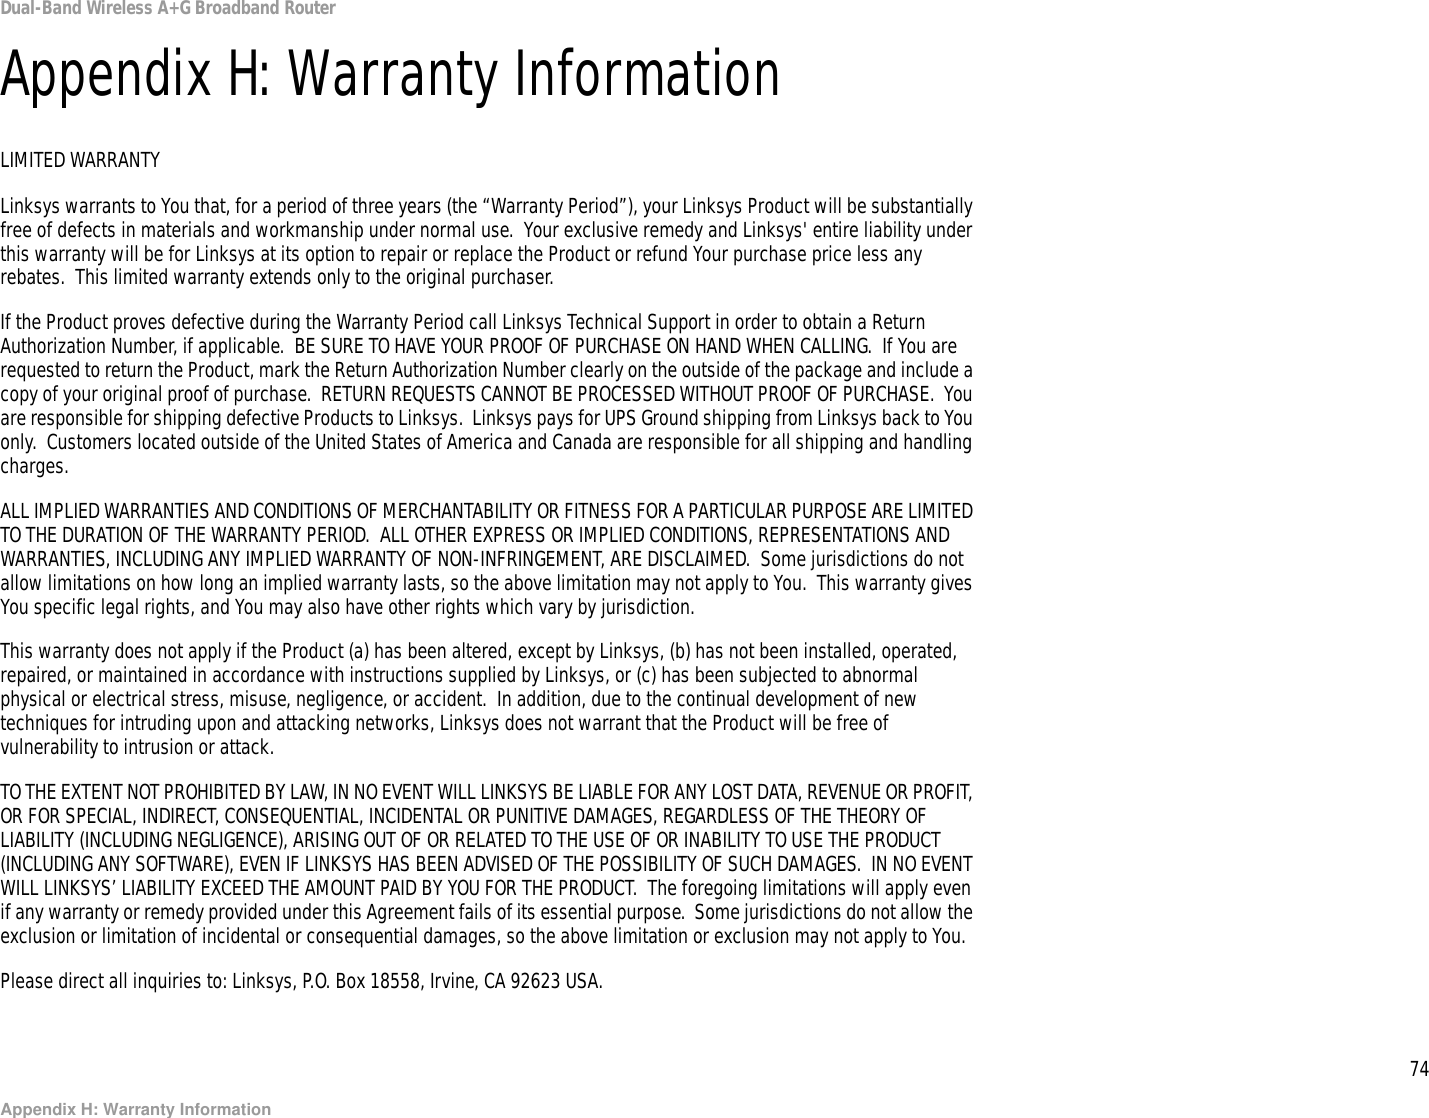 74Appendix H: Warranty InformationDual-Band Wireless A+G Broadband RouterAppendix H: Warranty InformationLIMITED WARRANTYLinksys warrants to You that, for a period of three years (the “Warranty Period”), your Linksys Product will be substantially free of defects in materials and workmanship under normal use.  Your exclusive remedy and Linksys&apos; entire liability under this warranty will be for Linksys at its option to repair or replace the Product or refund Your purchase price less any rebates.  This limited warranty extends only to the original purchaser.  If the Product proves defective during the Warranty Period call Linksys Technical Support in order to obtain a Return Authorization Number, if applicable.  BE SURE TO HAVE YOUR PROOF OF PURCHASE ON HAND WHEN CALLING.  If You are requested to return the Product, mark the Return Authorization Number clearly on the outside of the package and include a copy of your original proof of purchase.  RETURN REQUESTS CANNOT BE PROCESSED WITHOUT PROOF OF PURCHASE.  You are responsible for shipping defective Products to Linksys.  Linksys pays for UPS Ground shipping from Linksys back to You only.  Customers located outside of the United States of America and Canada are responsible for all shipping and handling charges. ALL IMPLIED WARRANTIES AND CONDITIONS OF MERCHANTABILITY OR FITNESS FOR A PARTICULAR PURPOSE ARE LIMITED TO THE DURATION OF THE WARRANTY PERIOD.  ALL OTHER EXPRESS OR IMPLIED CONDITIONS, REPRESENTATIONS AND WARRANTIES, INCLUDING ANY IMPLIED WARRANTY OF NON-INFRINGEMENT, ARE DISCLAIMED.  Some jurisdictions do not allow limitations on how long an implied warranty lasts, so the above limitation may not apply to You.  This warranty gives You specific legal rights, and You may also have other rights which vary by jurisdiction.This warranty does not apply if the Product (a) has been altered, except by Linksys, (b) has not been installed, operated, repaired, or maintained in accordance with instructions supplied by Linksys, or (c) has been subjected to abnormal physical or electrical stress, misuse, negligence, or accident.  In addition, due to the continual development of new techniques for intruding upon and attacking networks, Linksys does not warrant that the Product will be free of vulnerability to intrusion or attack.TO THE EXTENT NOT PROHIBITED BY LAW, IN NO EVENT WILL LINKSYS BE LIABLE FOR ANY LOST DATA, REVENUE OR PROFIT, OR FOR SPECIAL, INDIRECT, CONSEQUENTIAL, INCIDENTAL OR PUNITIVE DAMAGES, REGARDLESS OF THE THEORY OF LIABILITY (INCLUDING NEGLIGENCE), ARISING OUT OF OR RELATED TO THE USE OF OR INABILITY TO USE THE PRODUCT (INCLUDING ANY SOFTWARE), EVEN IF LINKSYS HAS BEEN ADVISED OF THE POSSIBILITY OF SUCH DAMAGES.  IN NO EVENT WILL LINKSYS’ LIABILITY EXCEED THE AMOUNT PAID BY YOU FOR THE PRODUCT.  The foregoing limitations will apply even if any warranty or remedy provided under this Agreement fails of its essential purpose.  Some jurisdictions do not allow the exclusion or limitation of incidental or consequential damages, so the above limitation or exclusion may not apply to You.Please direct all inquiries to: Linksys, P.O. Box 18558, Irvine, CA 92623 USA.